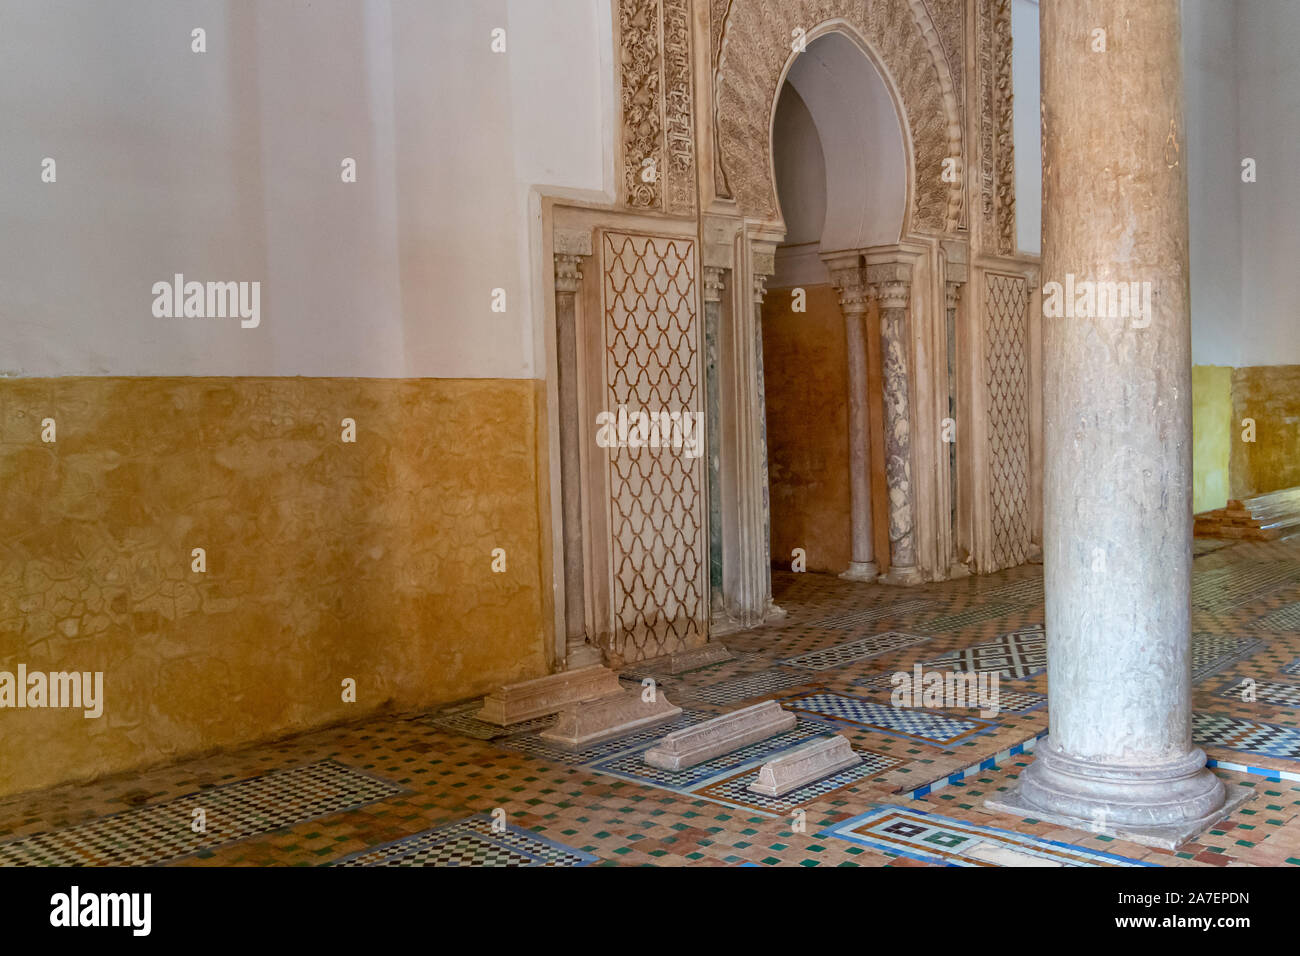 Interiors of Saadian tombs in the city of Marrakech, Morocco Stock Photo